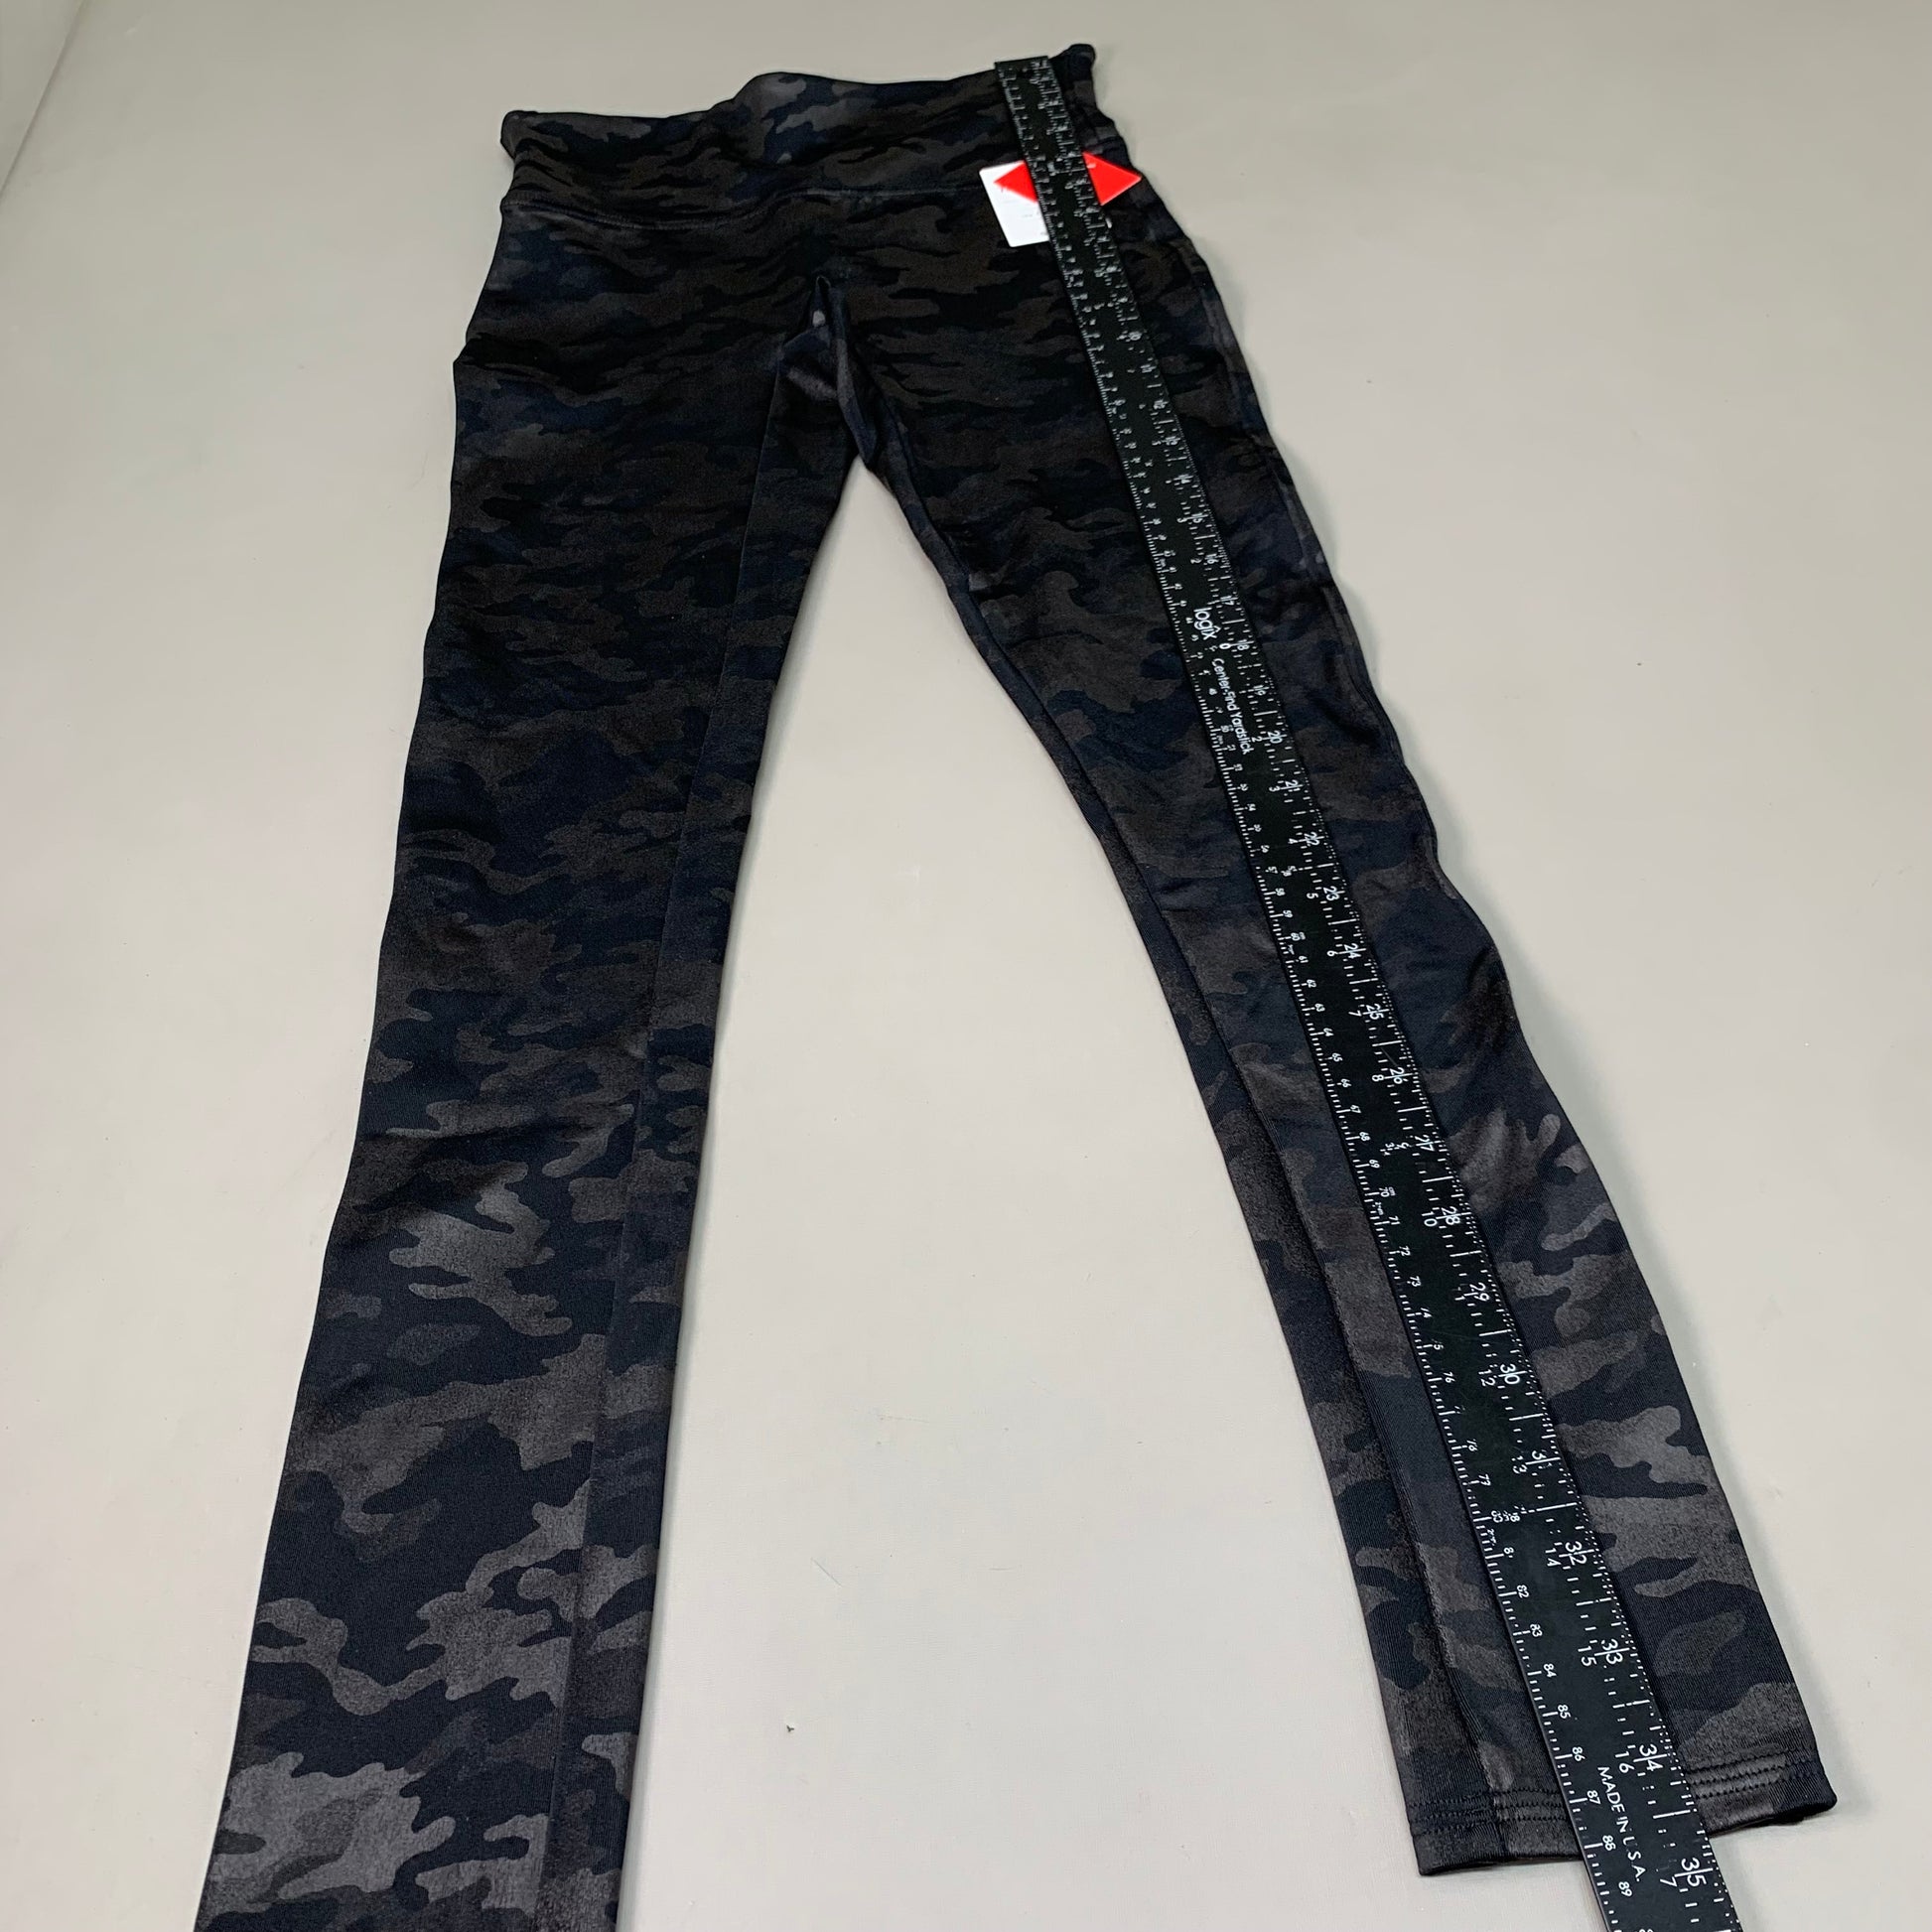 Spanx FAUX LEATHER CAMO LEGGINGS BLACK CAMO 20185R SIZE XS - $49 (50% Off  Retail) - From Trendshoppe